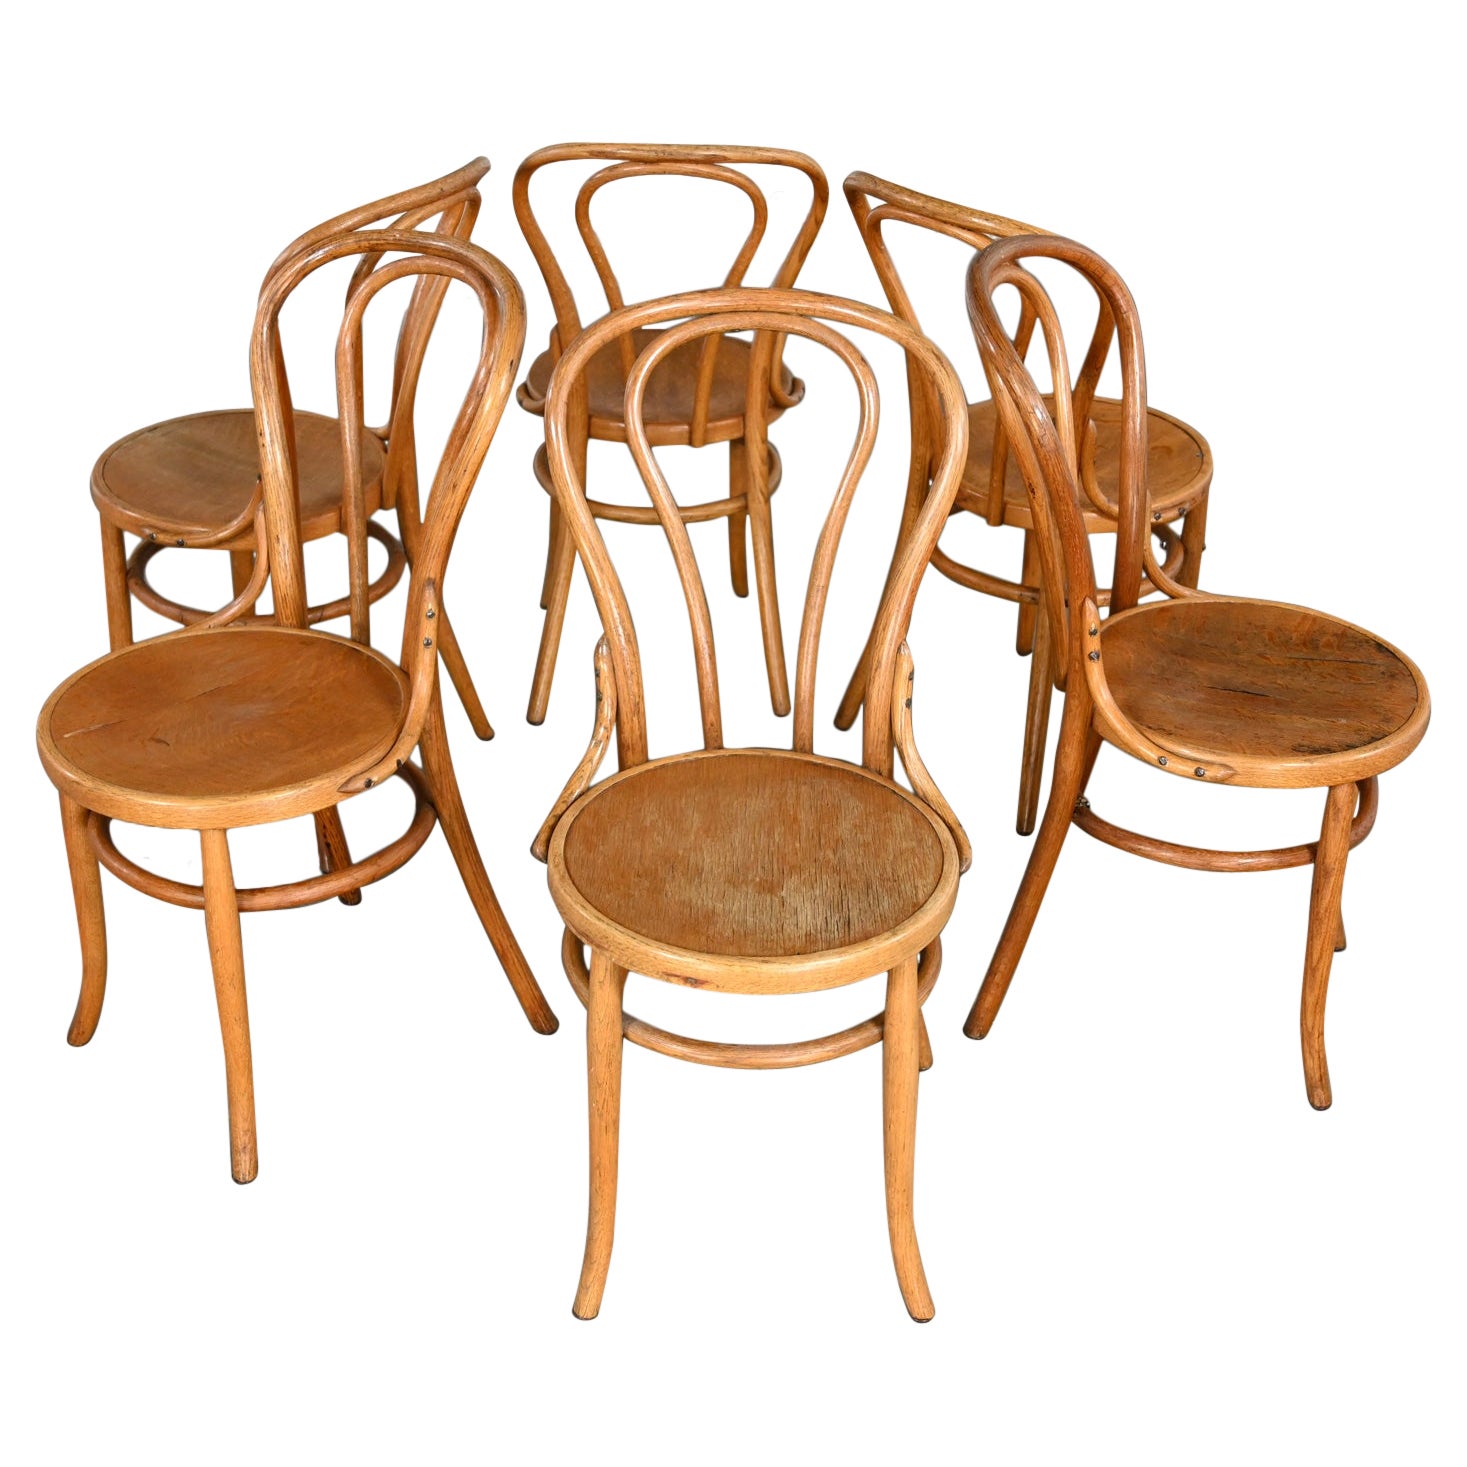 Bauhaus Oak Bentwood Chairs Attributed to Thonet #18 Café Chair Set of 6